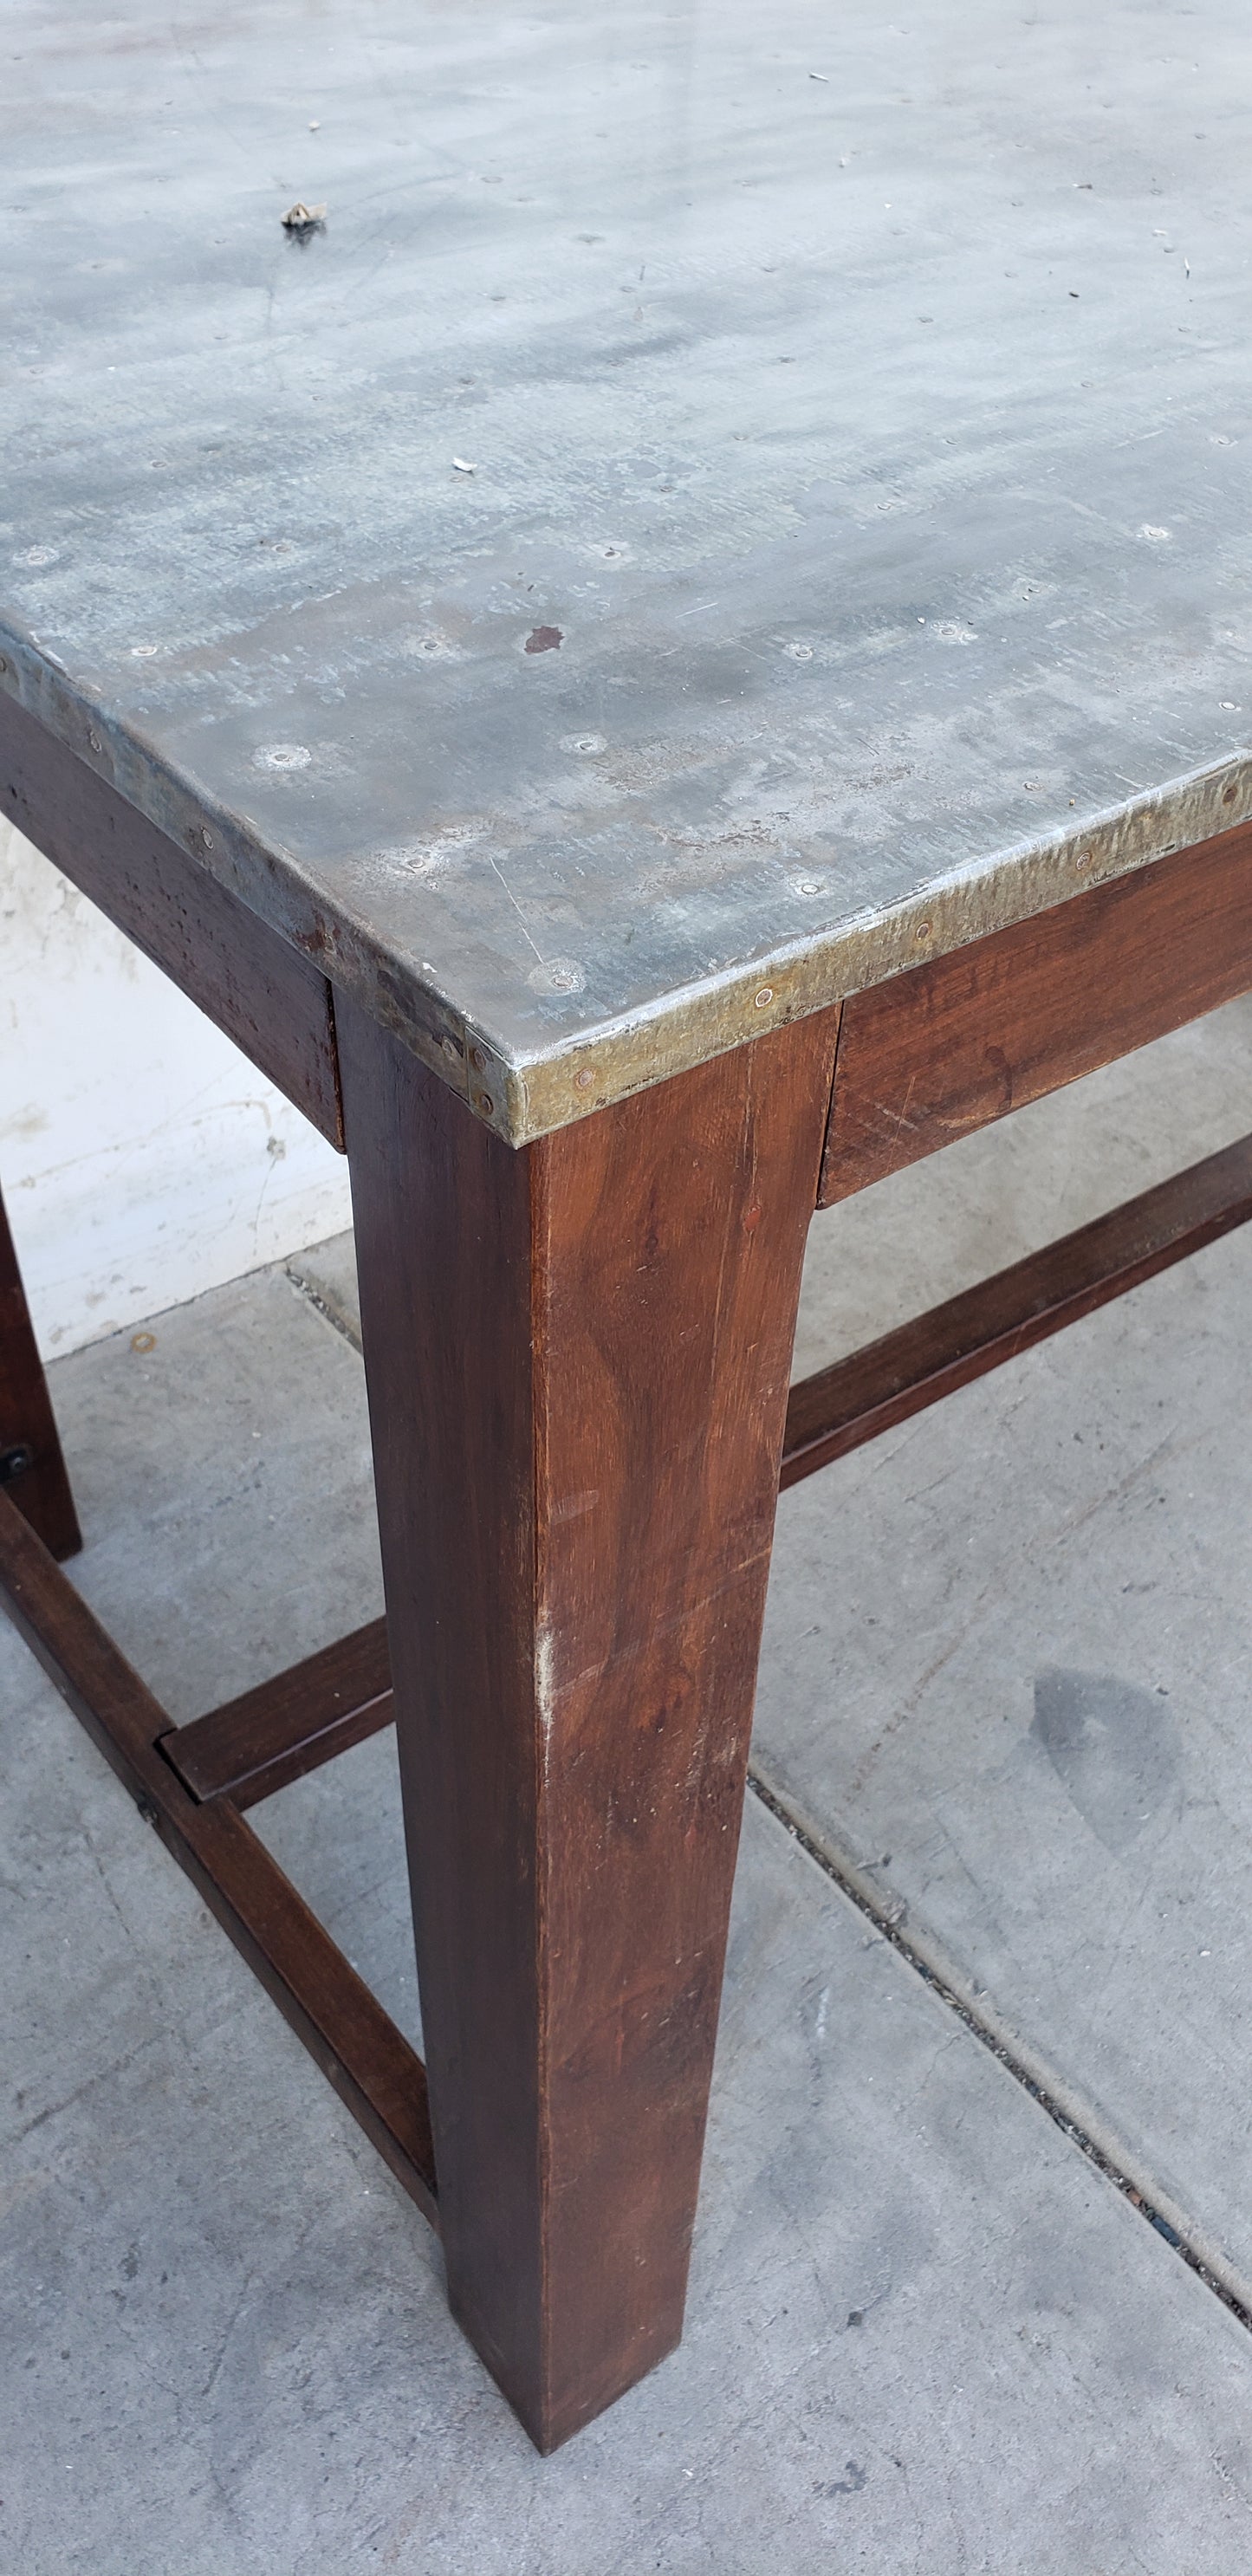 Tall Wood Table with Iron Top